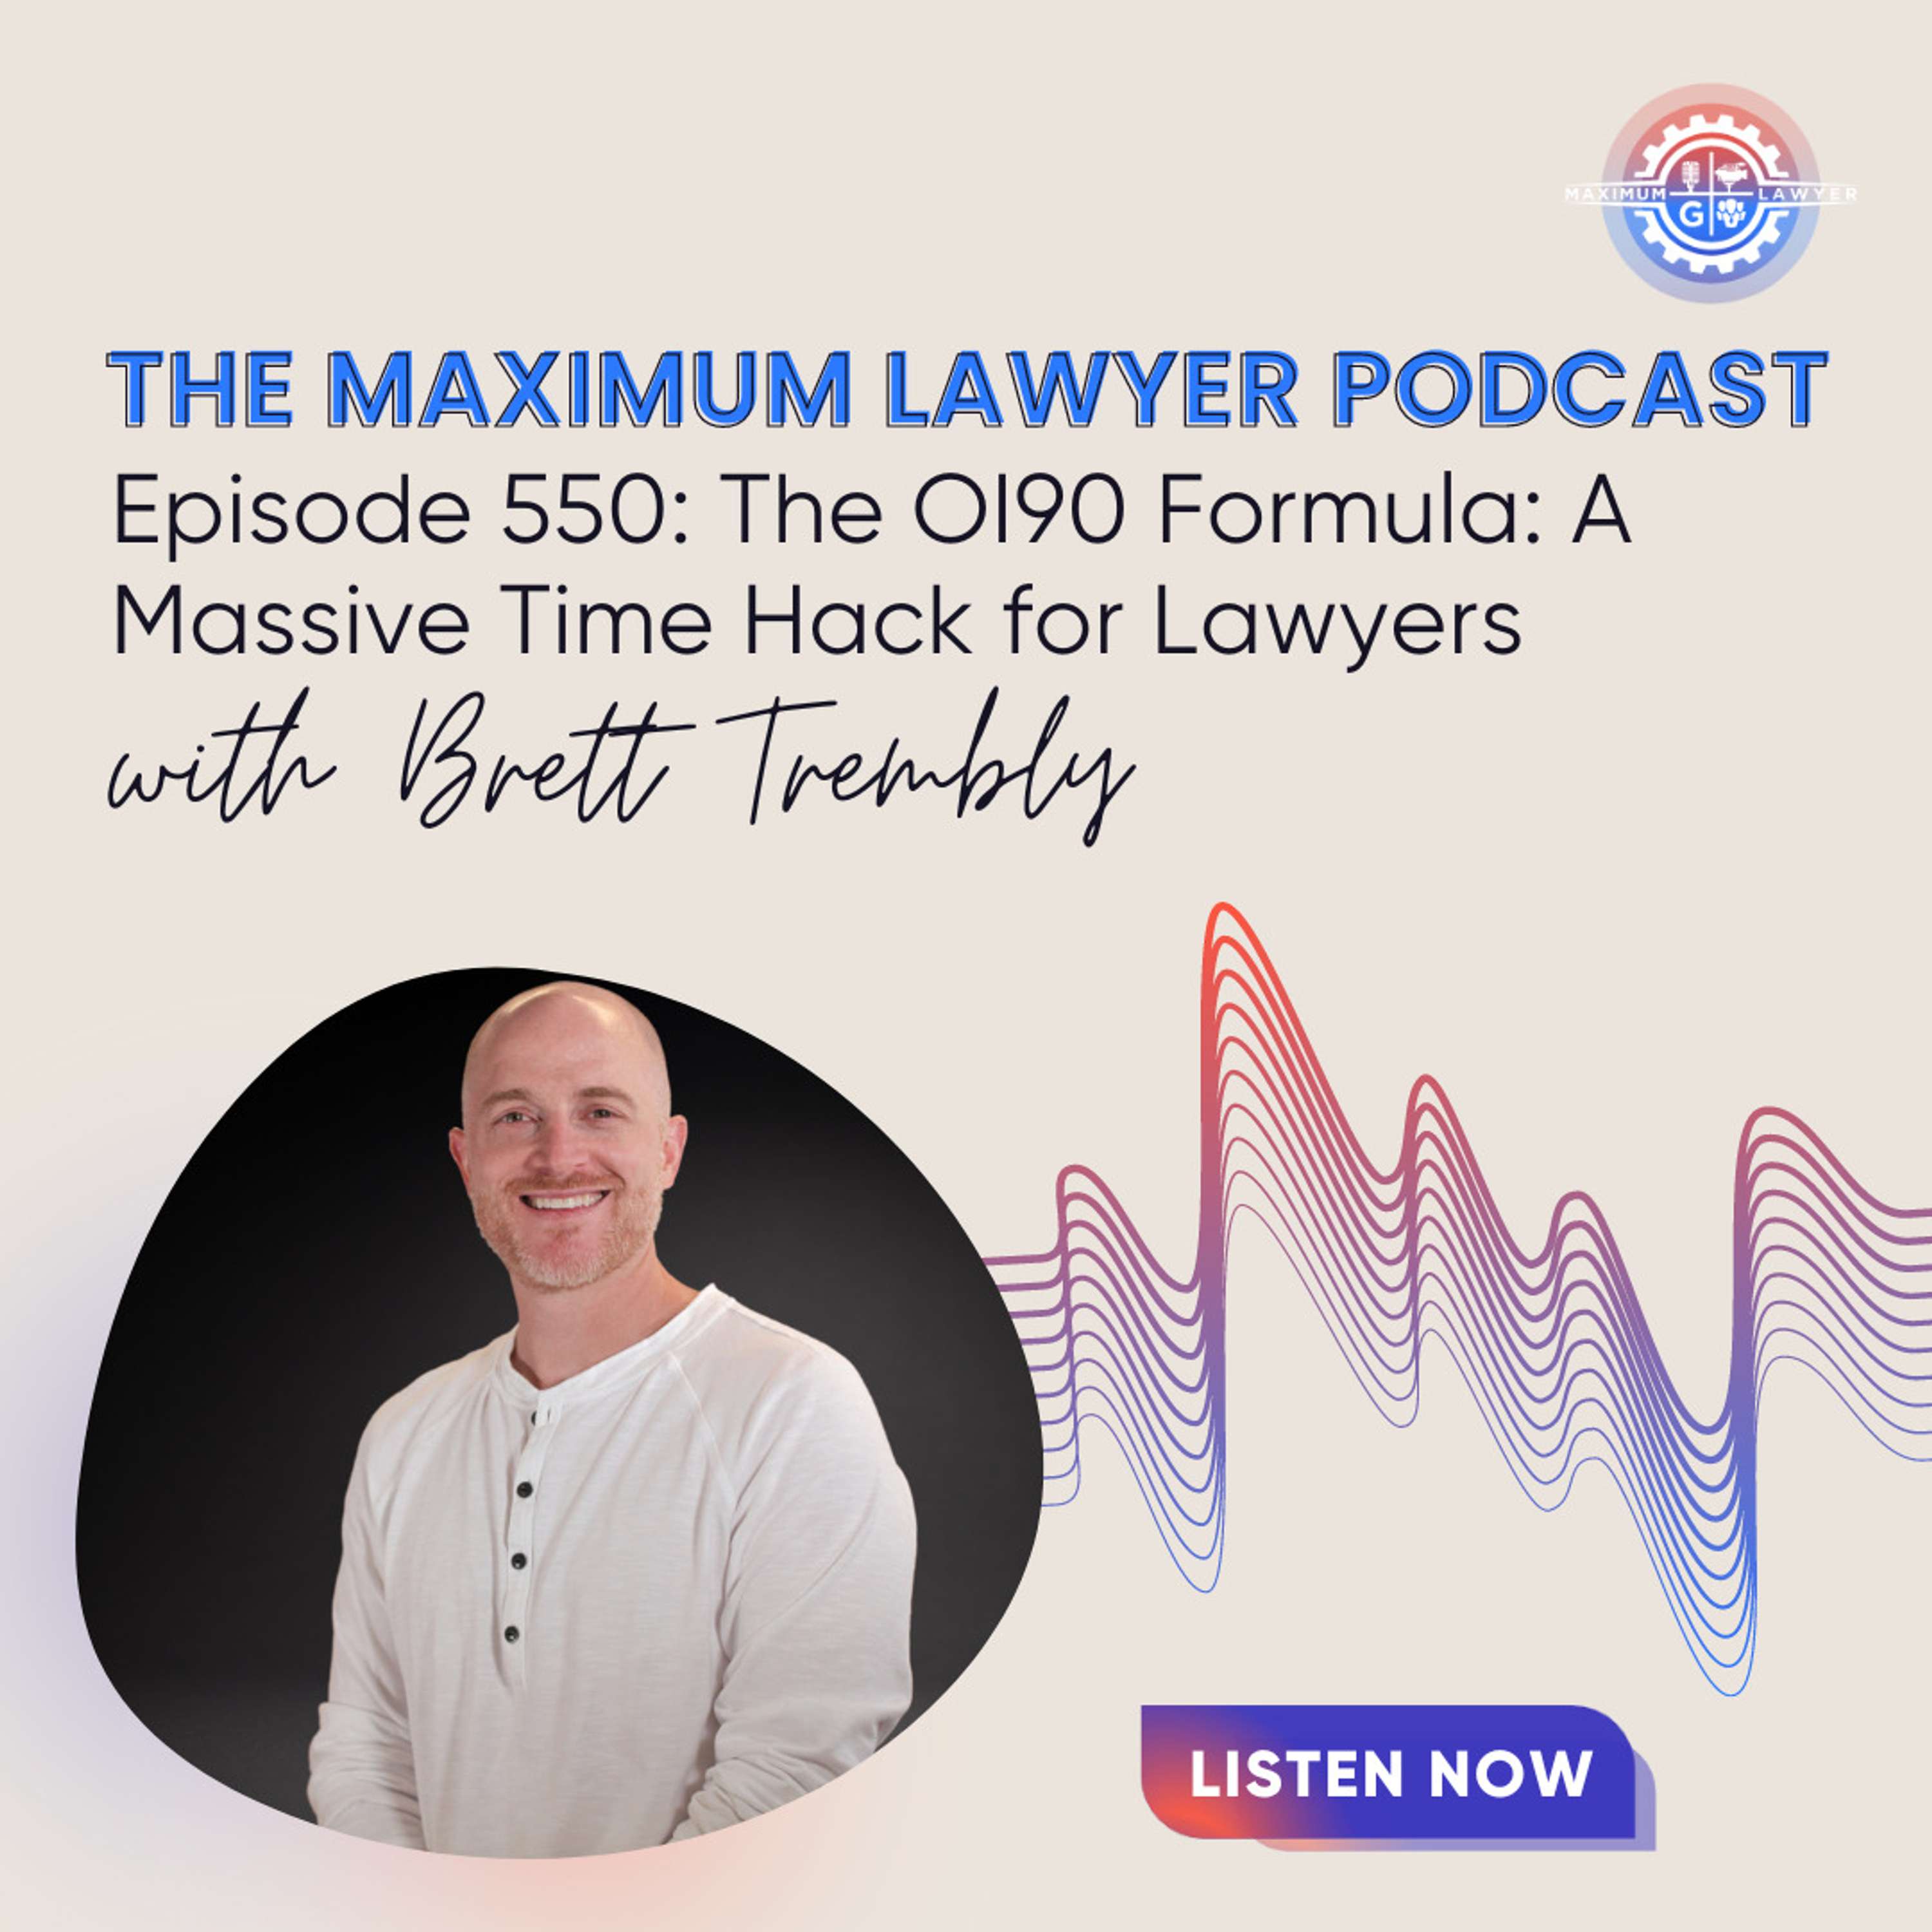 The OI90 Formula: A Massive Time Hack for Lawyers with Brett Trembly